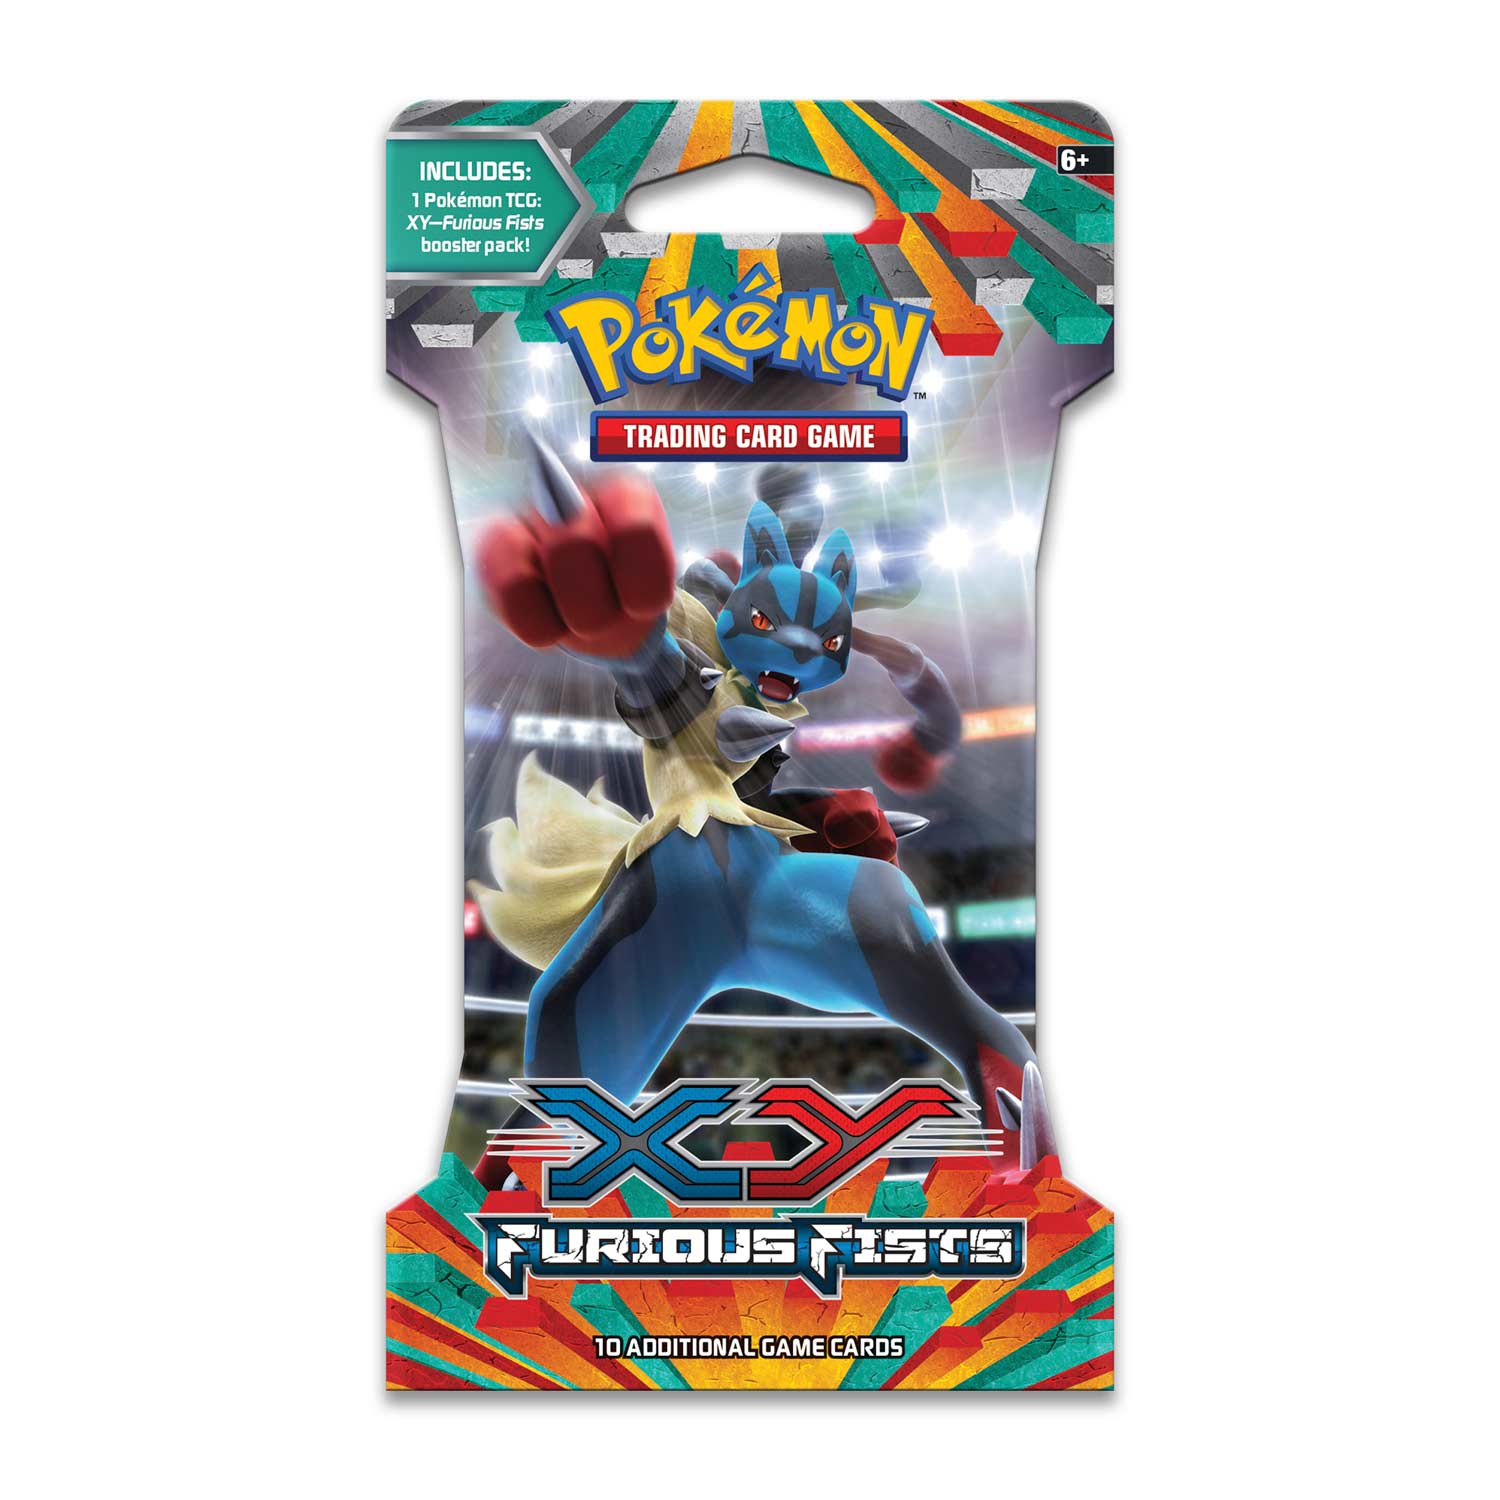 4 x Pokemon XY Furious Fists Booster Packs 10 Cards/pack Factory Sealed